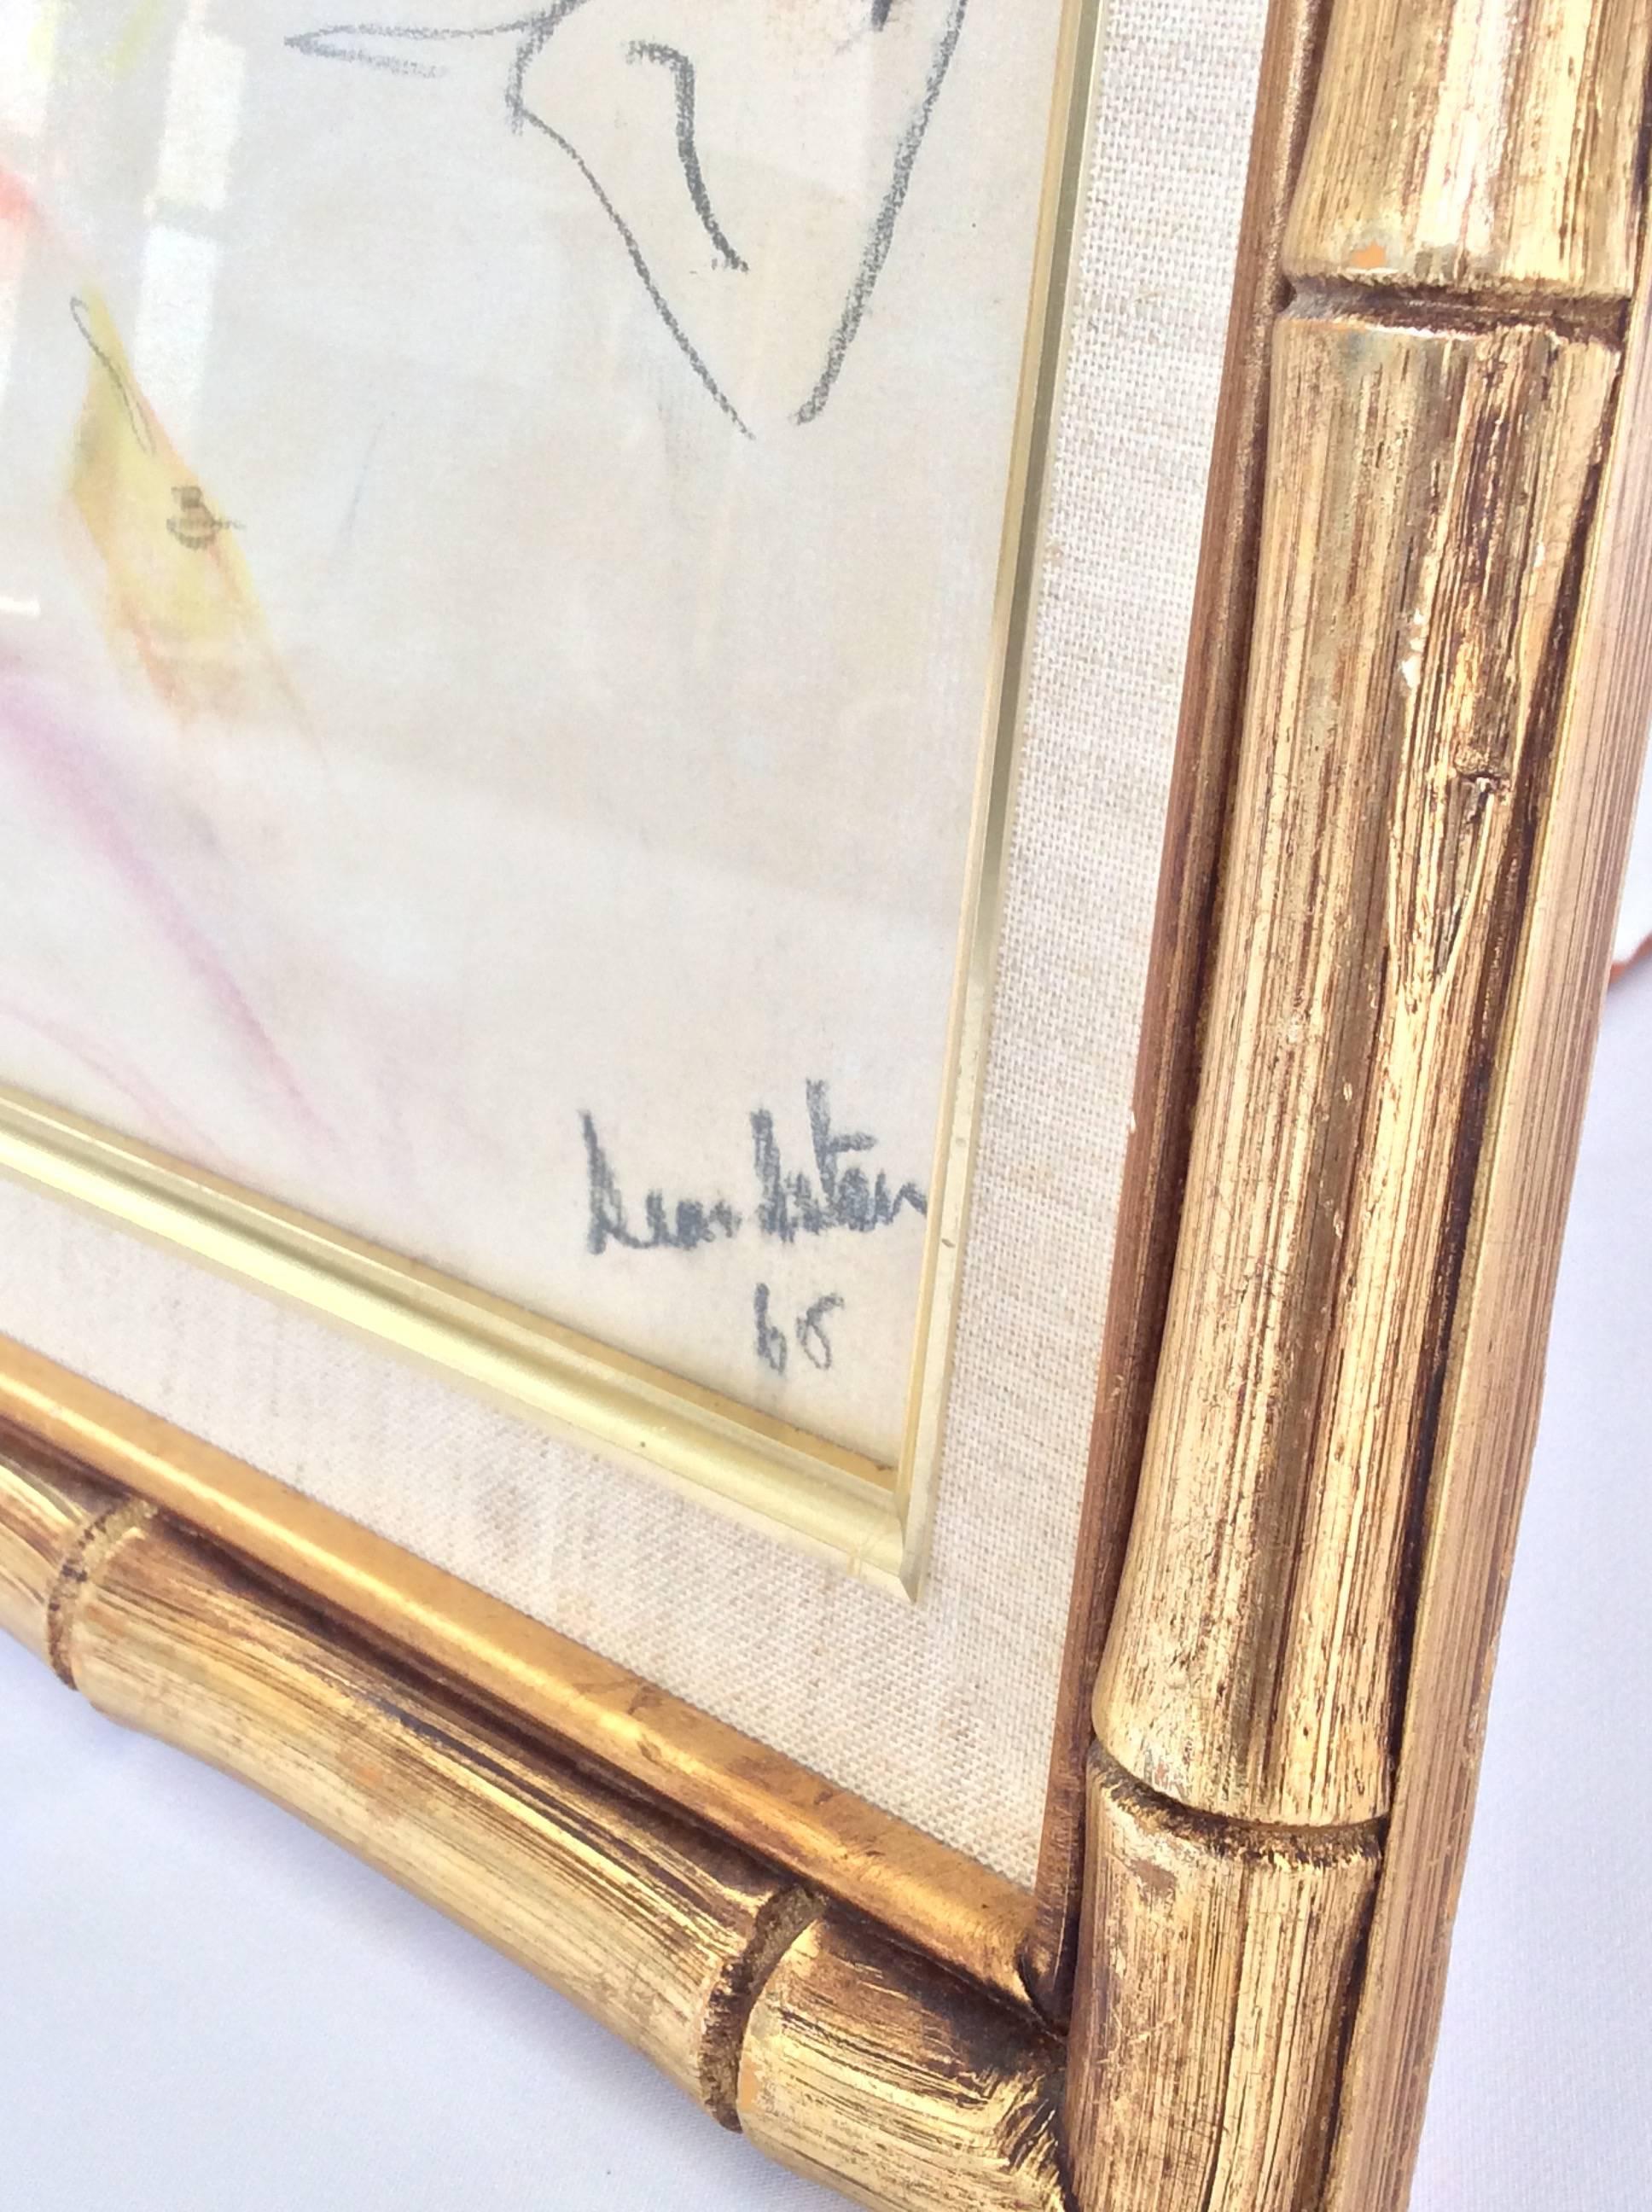 Original pastel abstract drawing, framed in period gilt bamboo and linen mat frame, covered by low glare glass. Signed and dated in lower right by artist, 1965.